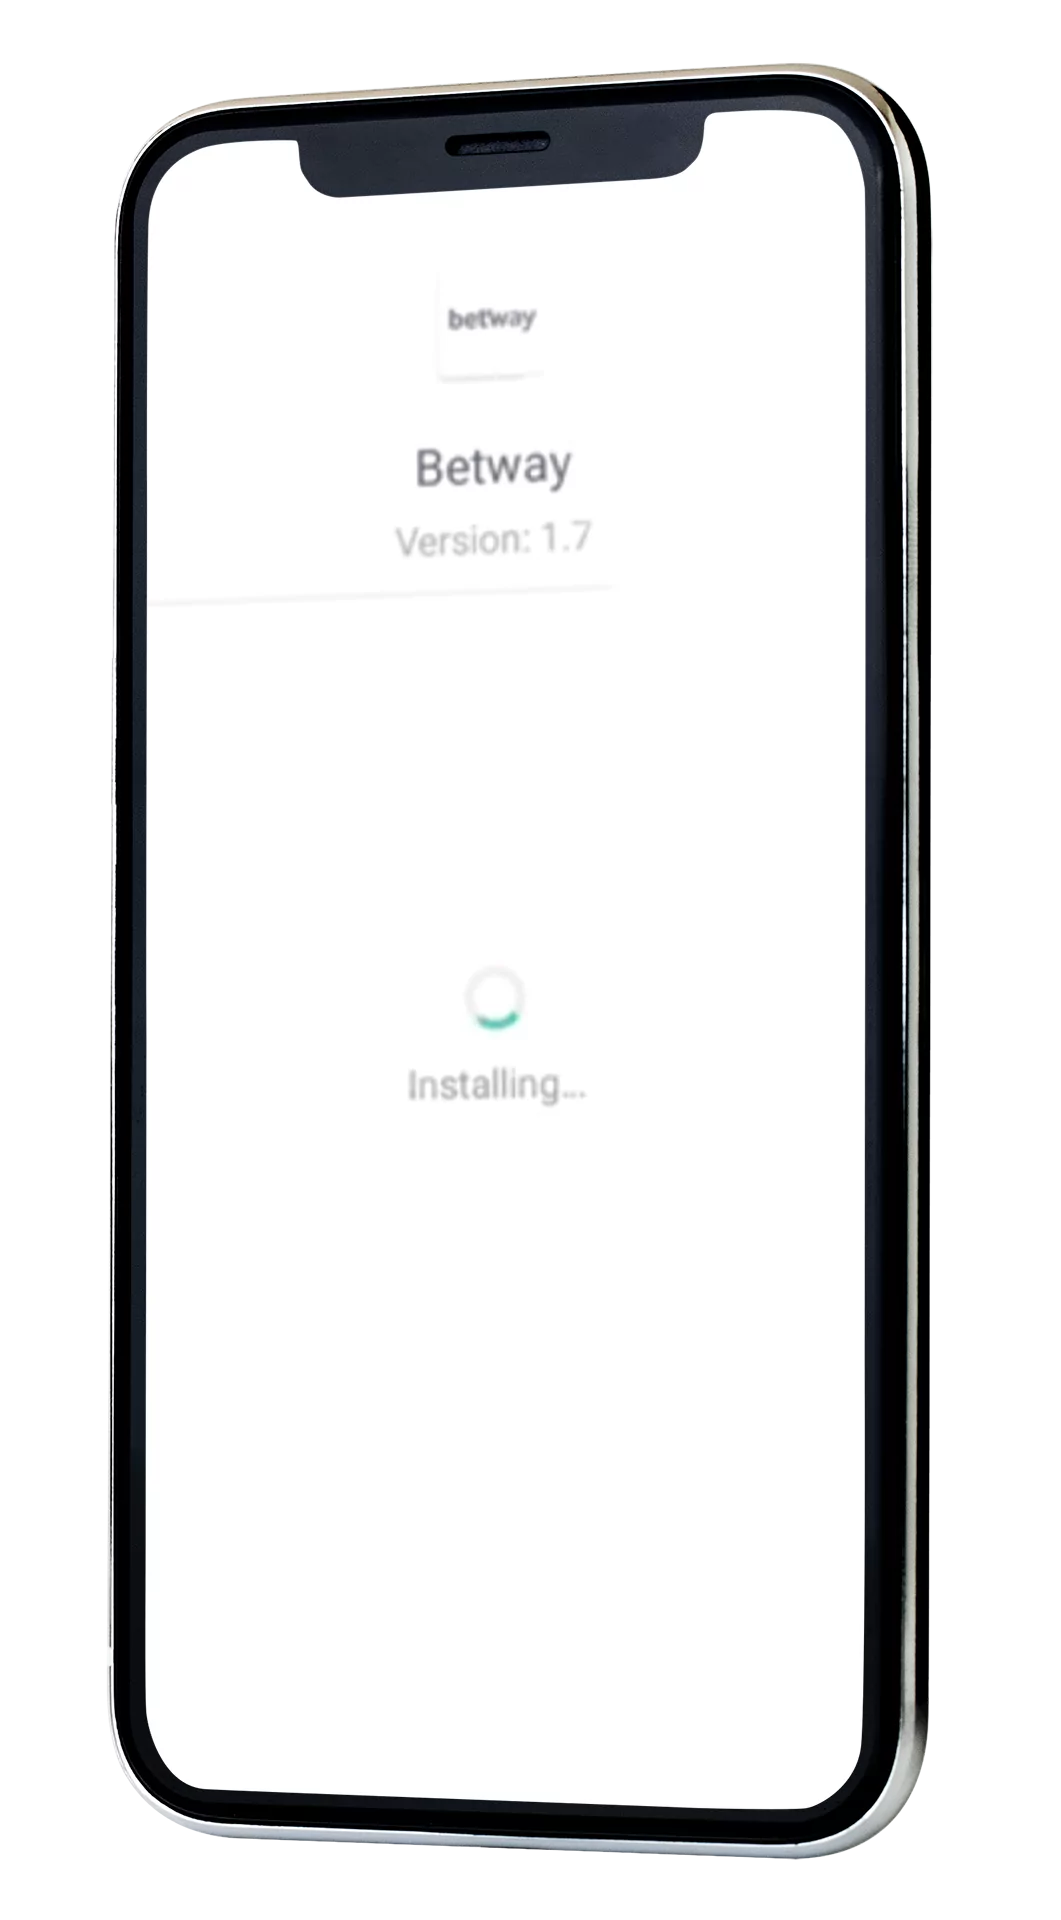 Step 3: Install the Betway App on your smartphone.